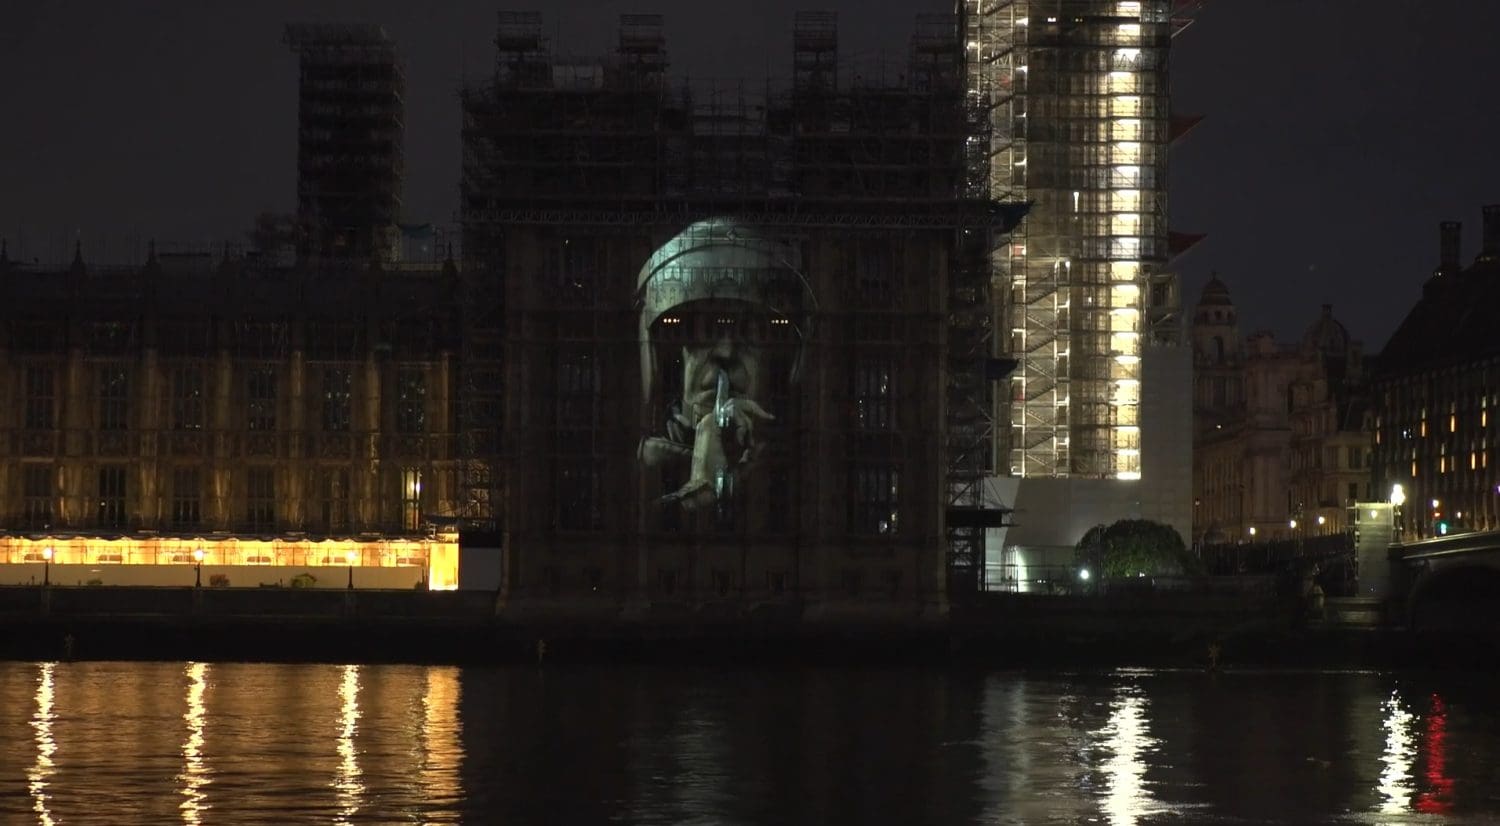 Riot police officer demanding silence projected onto Houses of Parliament